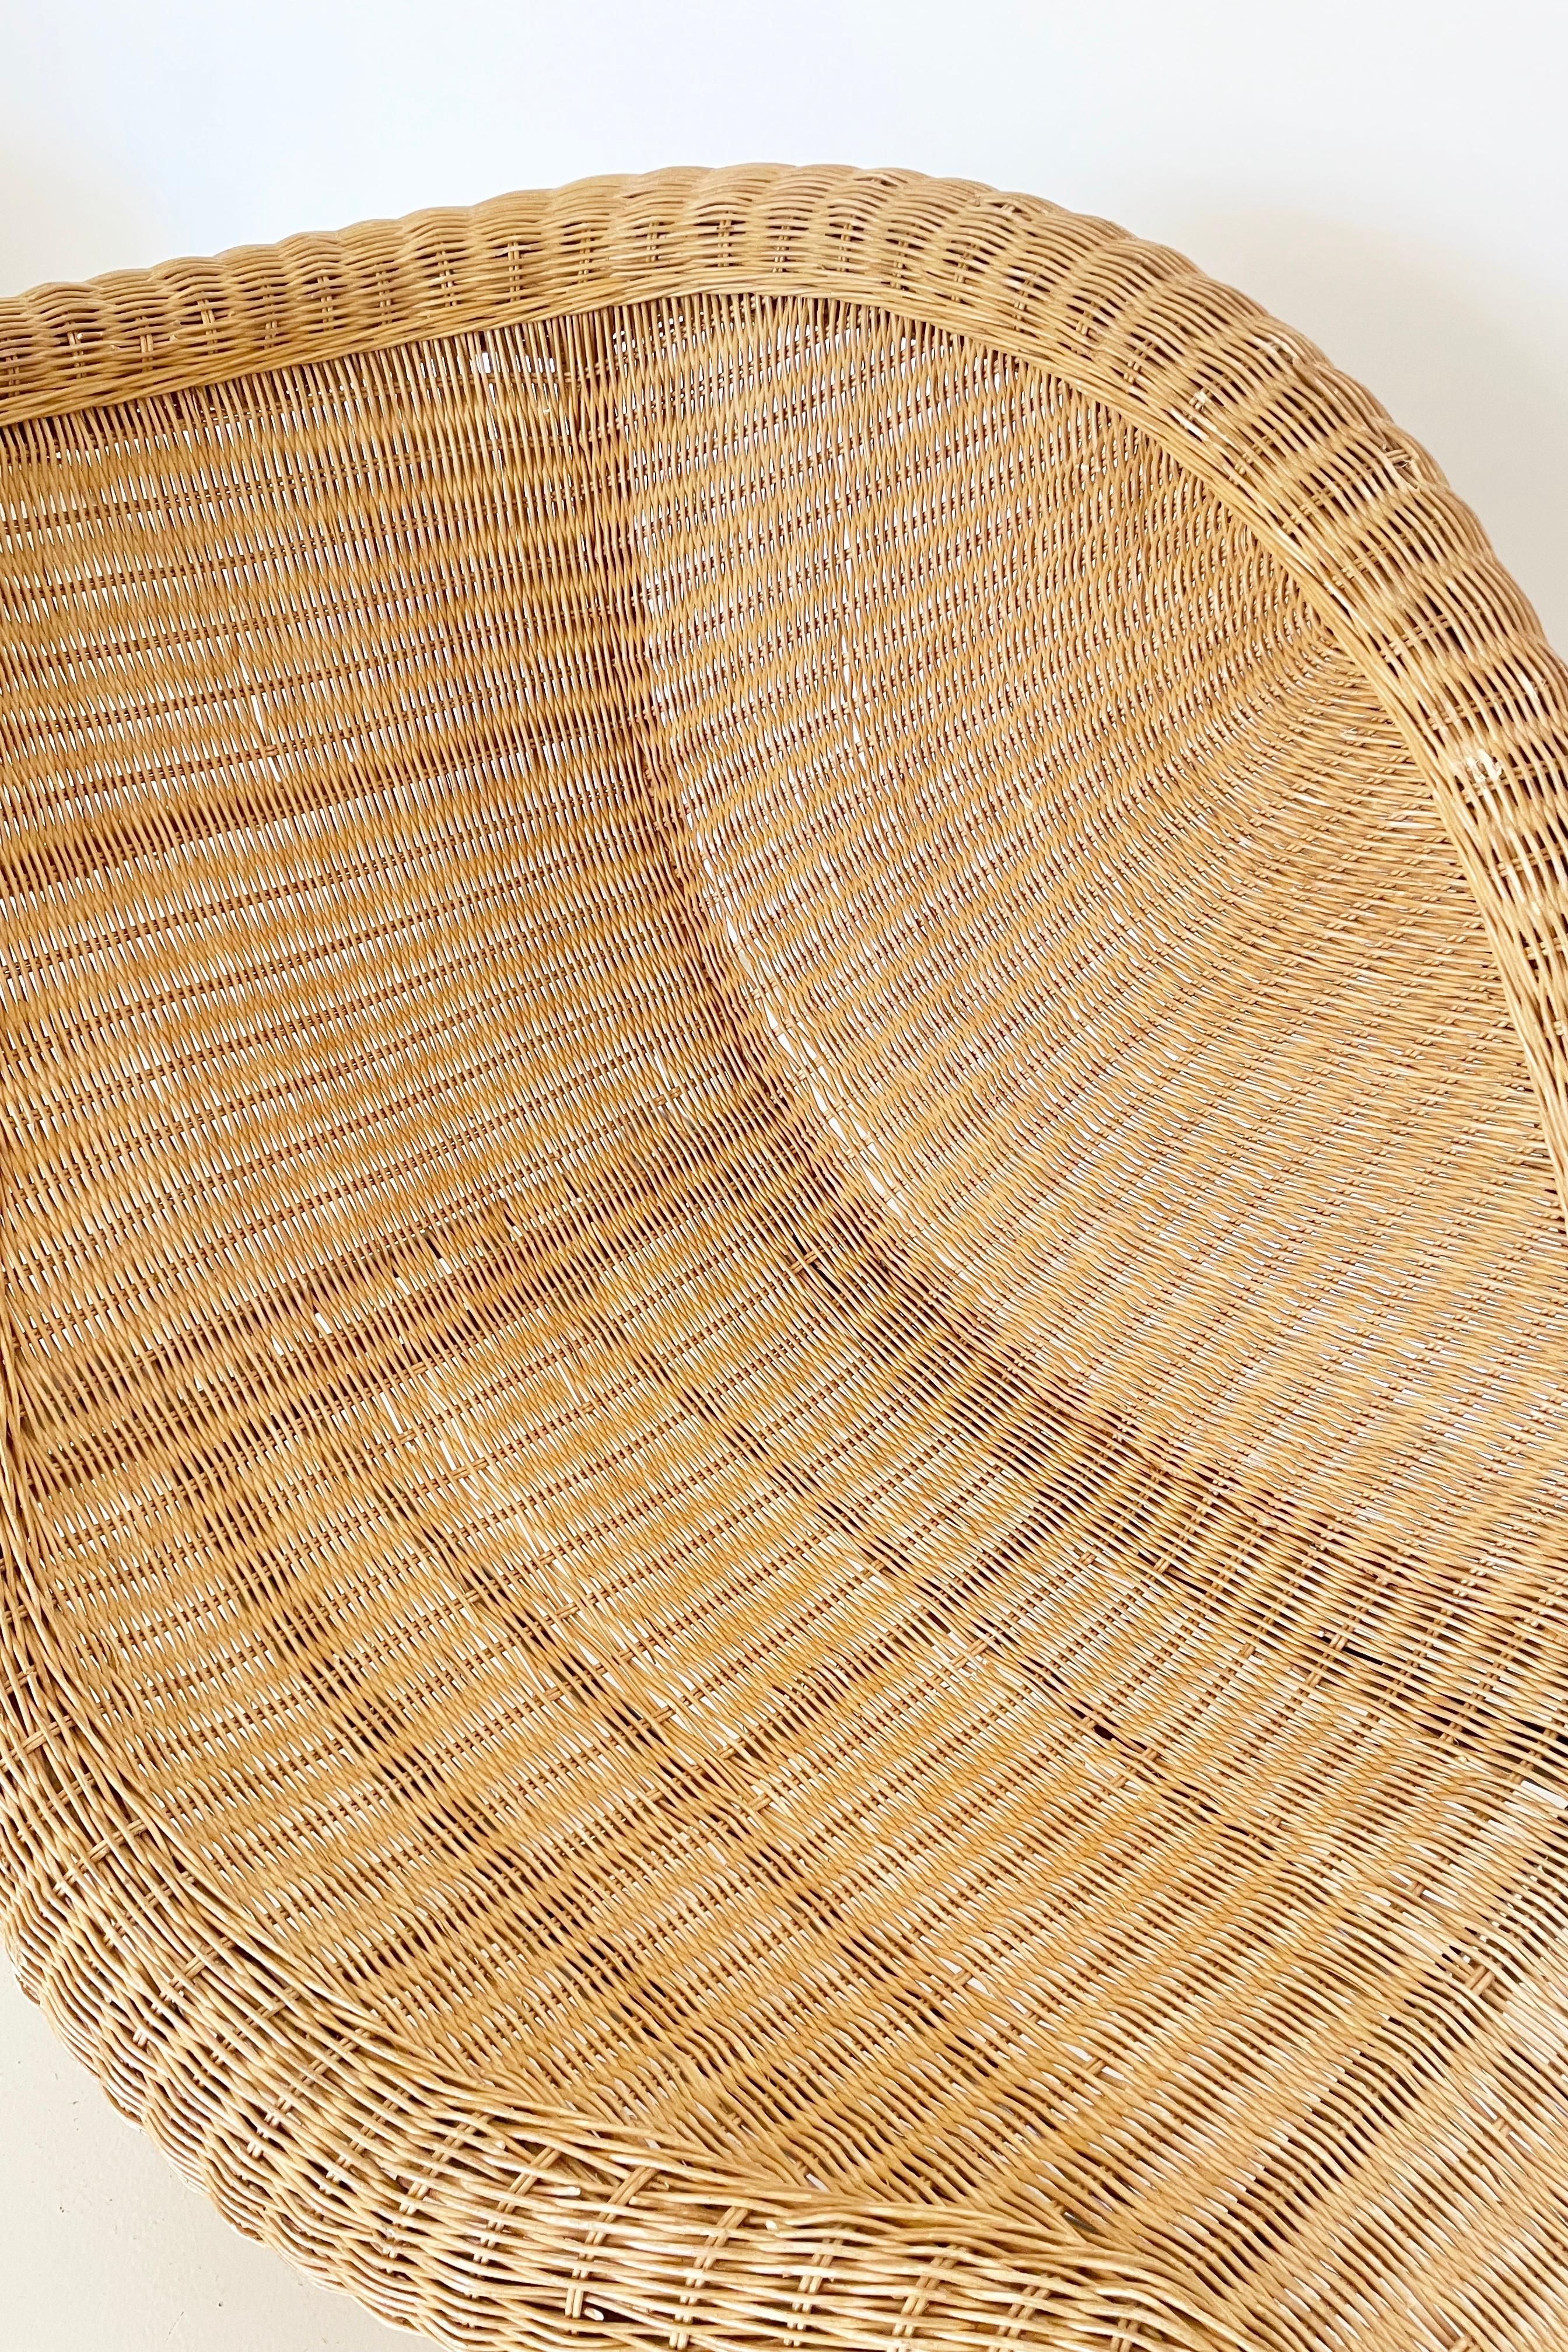 Vintage Wicker Chaise Lounge Chair For Sale 3